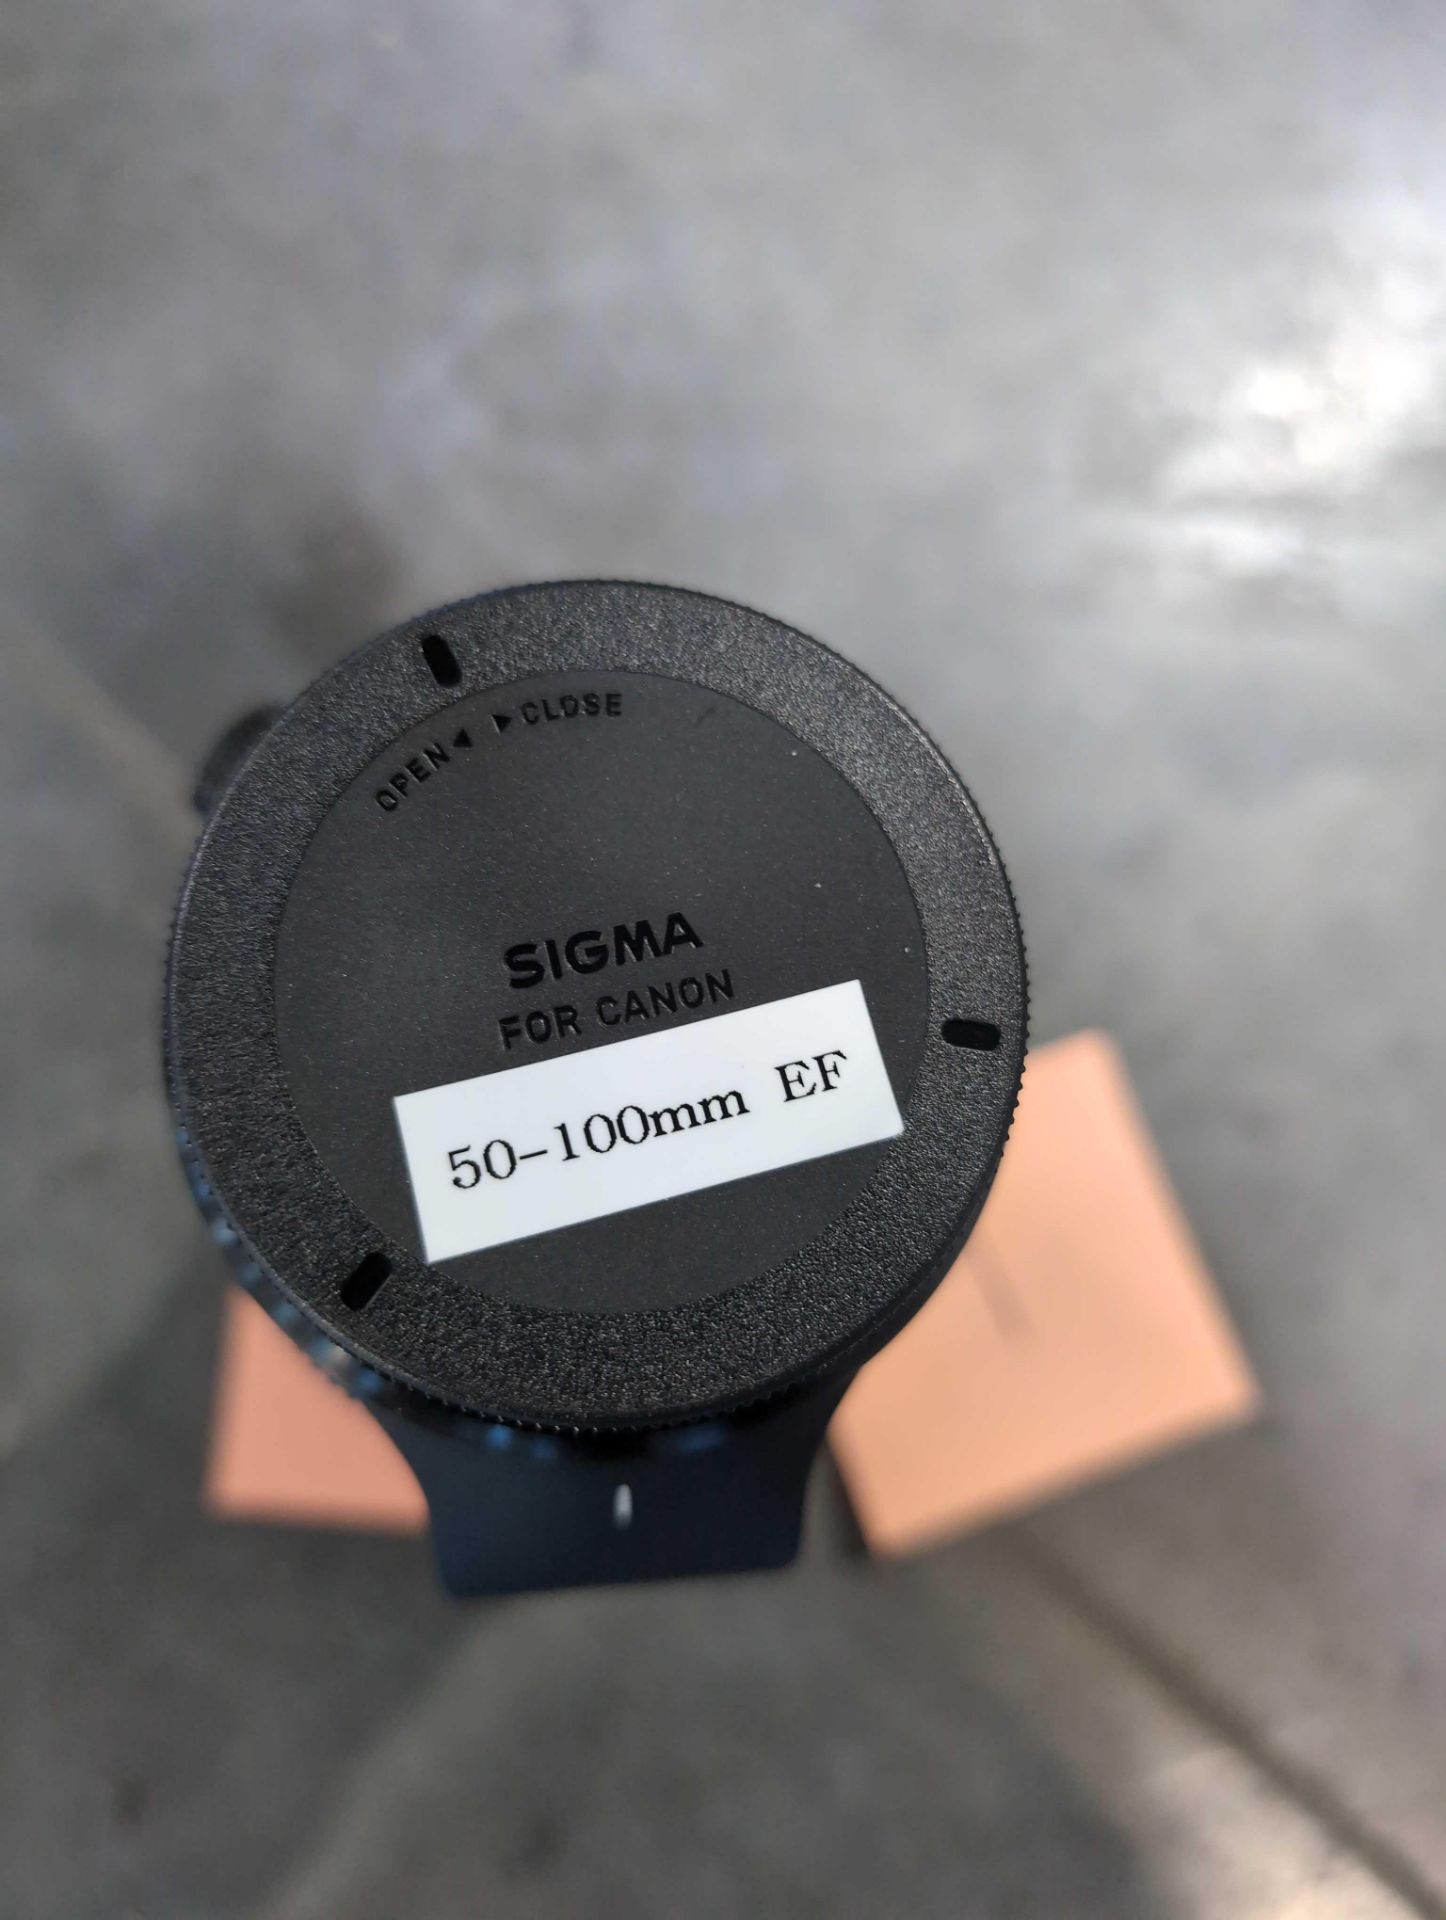 Sigma 50-100mm lens - Image 2 of 4